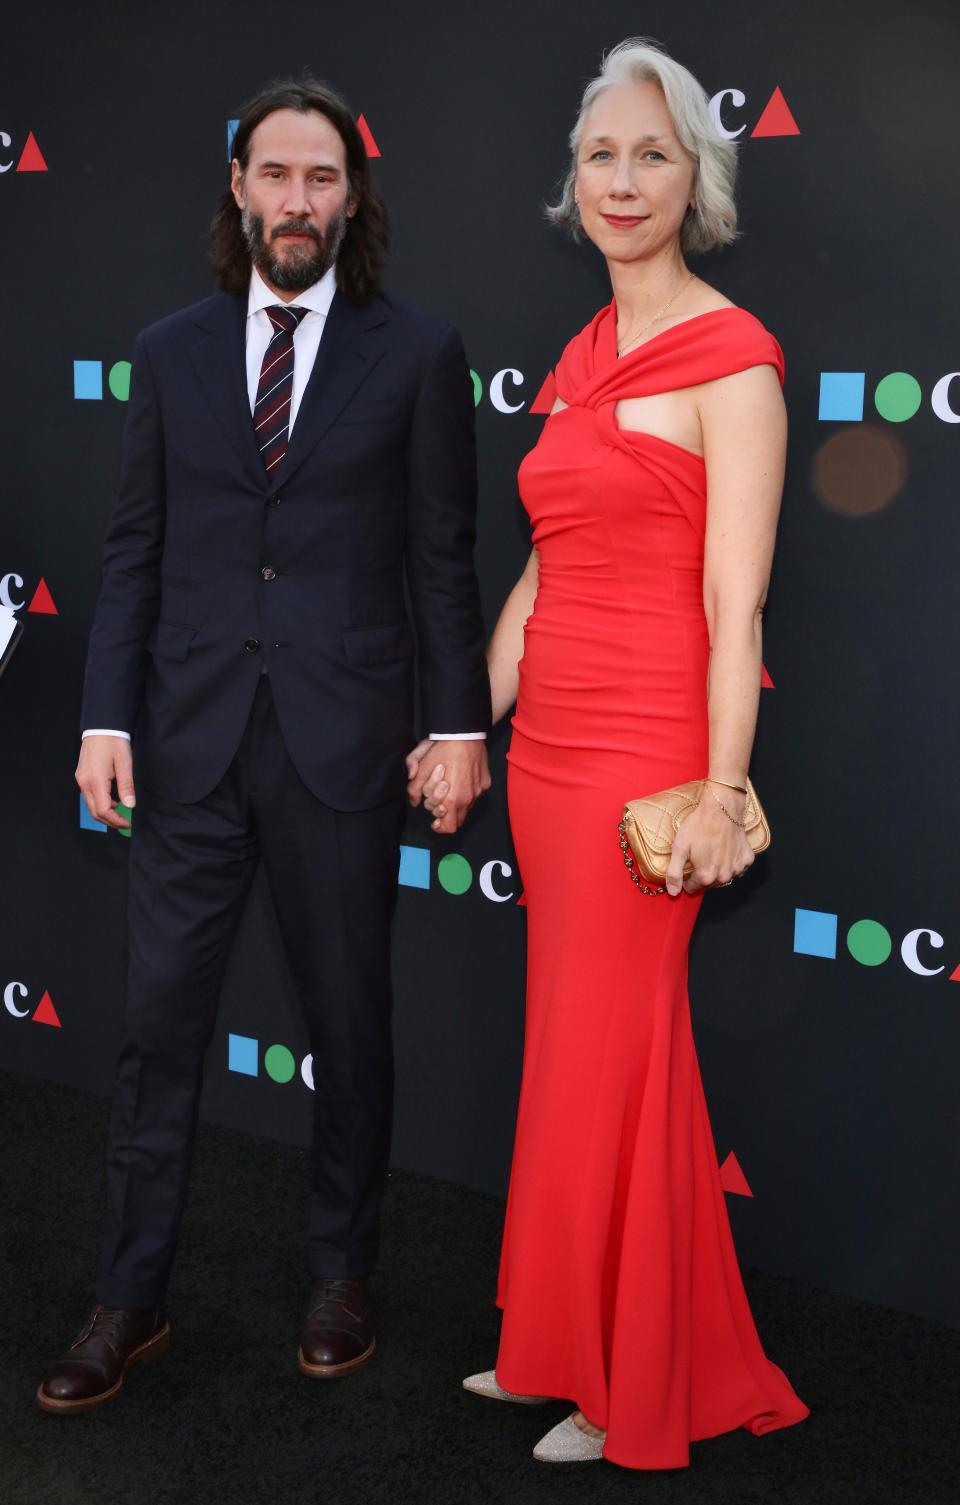 LOS ANGELES, CALIFORNIA - JUNE 04: Keanu Reeves and Alexandra Grant attend MOCA Gala 2022 at The Geffen Contemporary at MOCA on June 04, 2022 in Los Angeles, California. (Photo by Robin L Marshall/Getty Images)